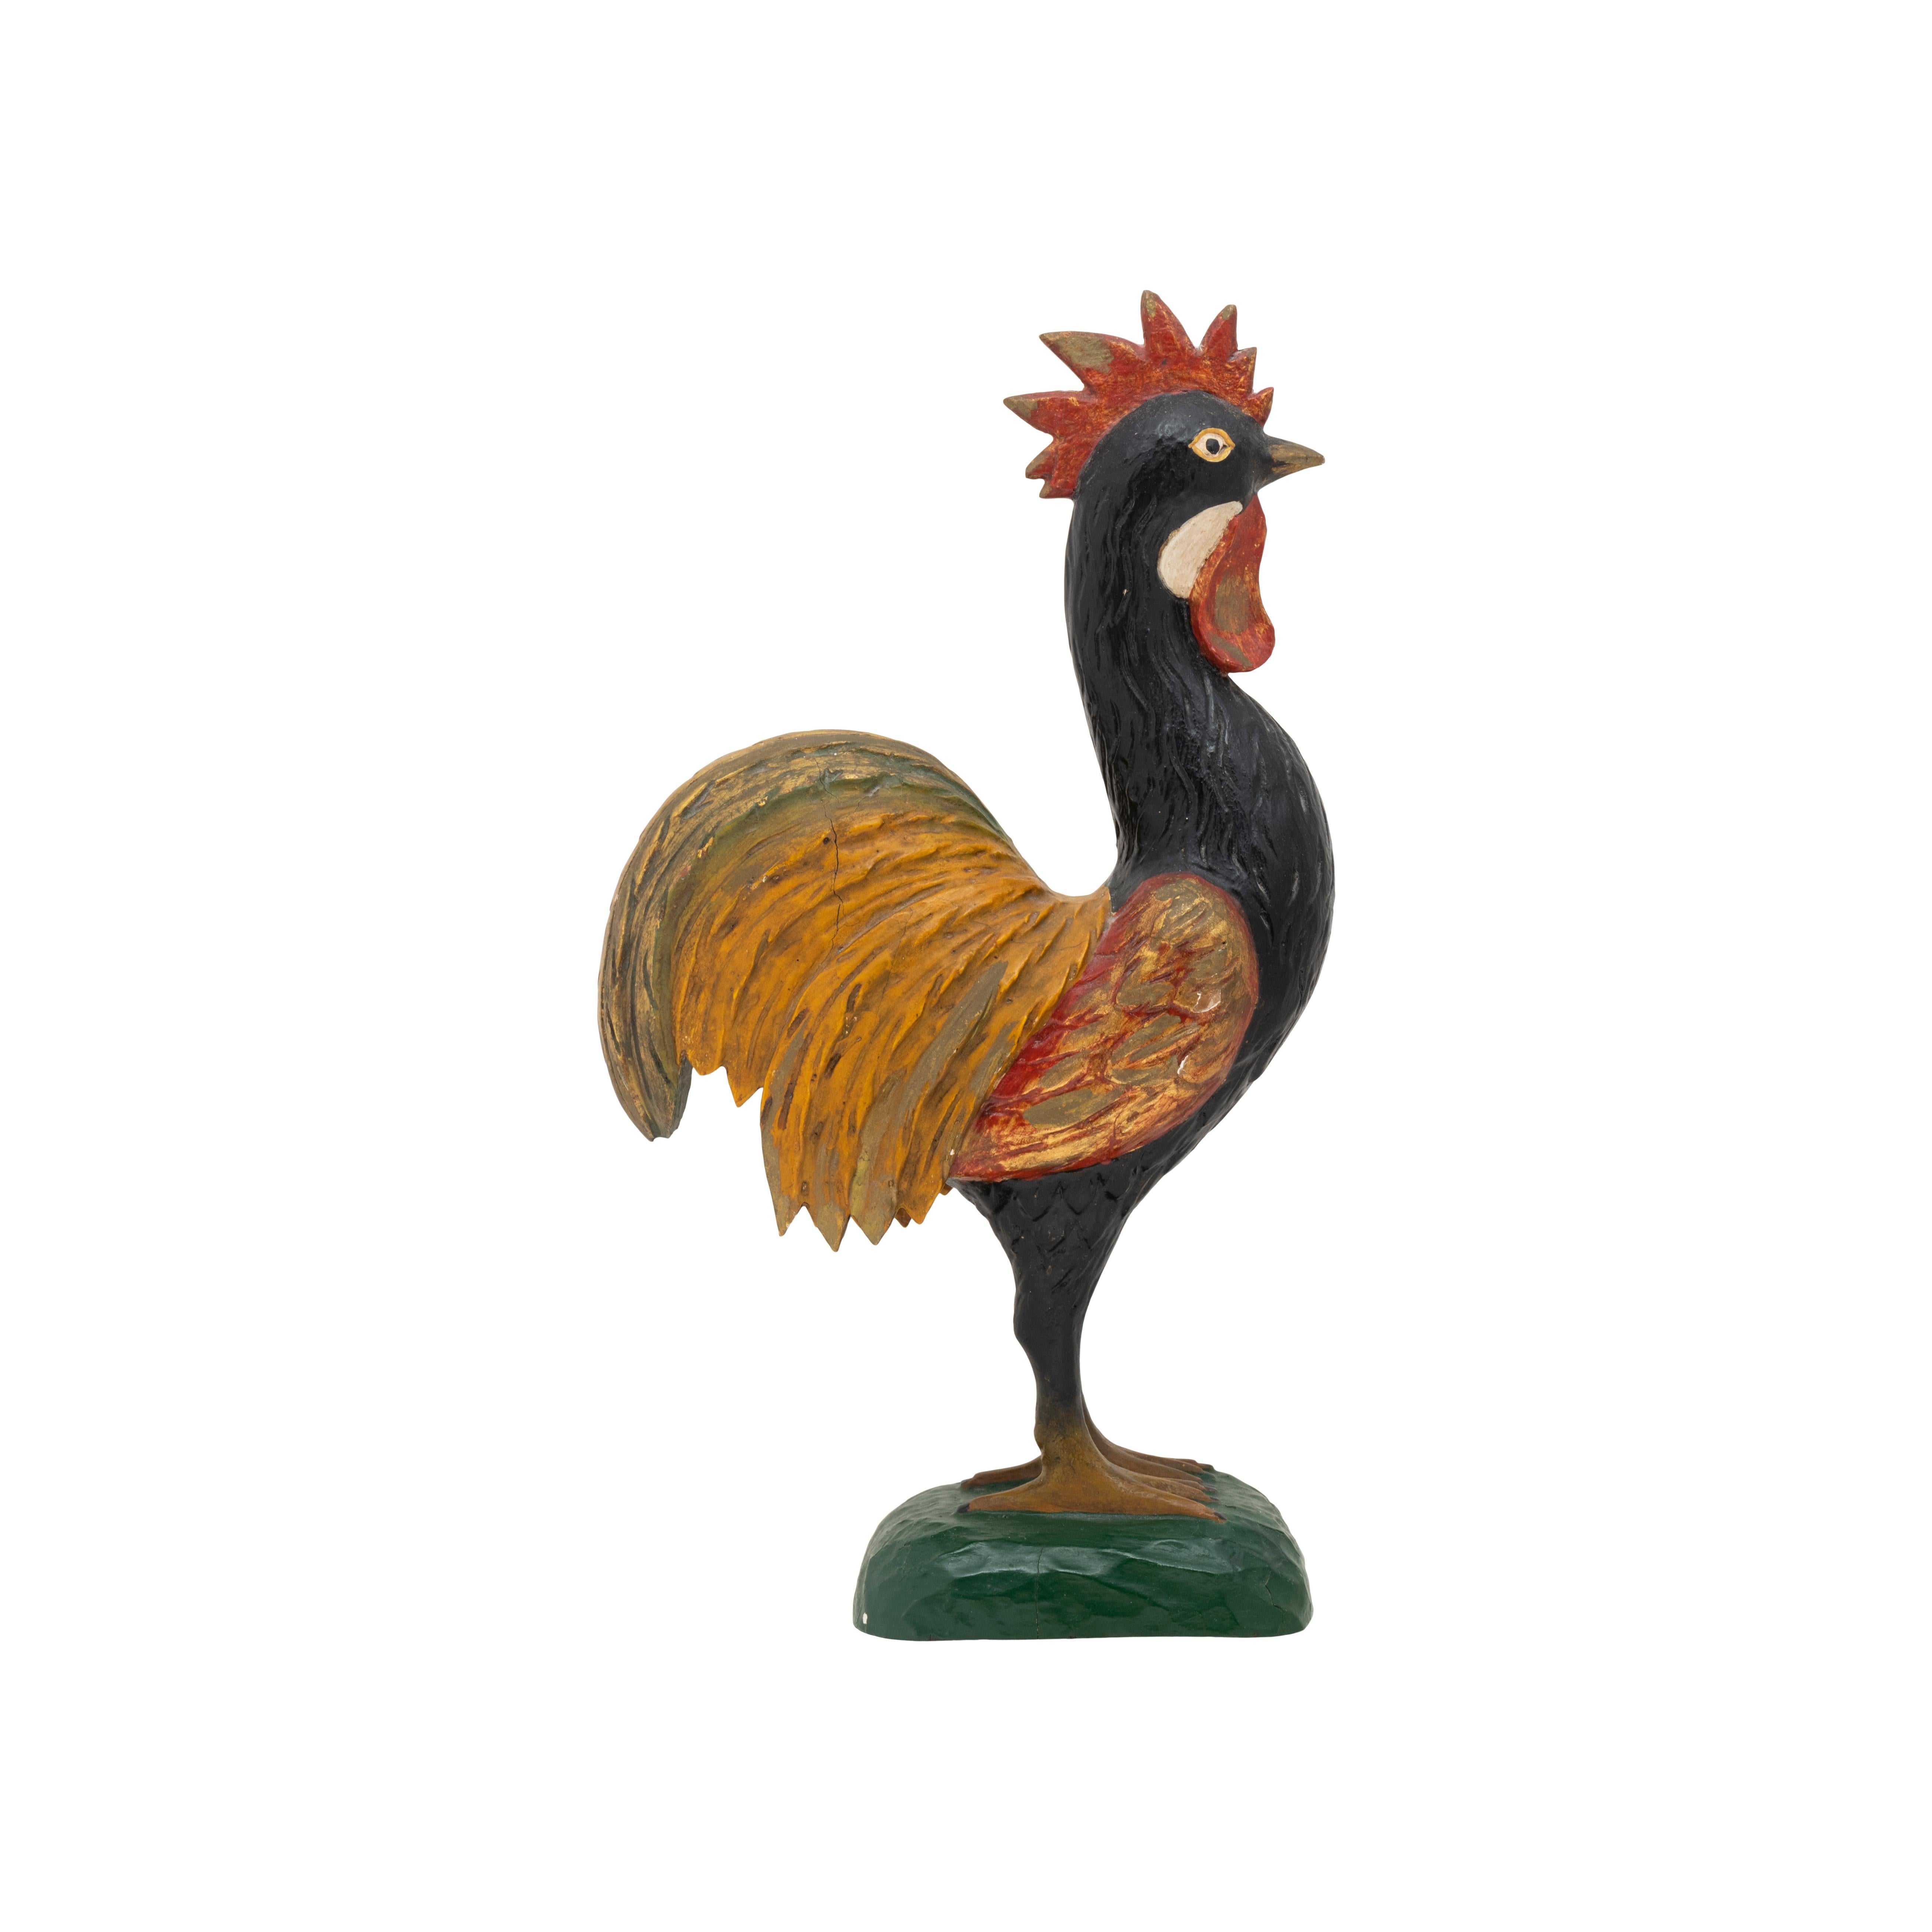 Mid 20th Century American polychrome carved figure of a rooster. Beautiful colors of black, orange, red, brown, cream and green. 

PERIOD: Mid 20th Century
ORIGIN: Unknown, United States
SIZE: 16